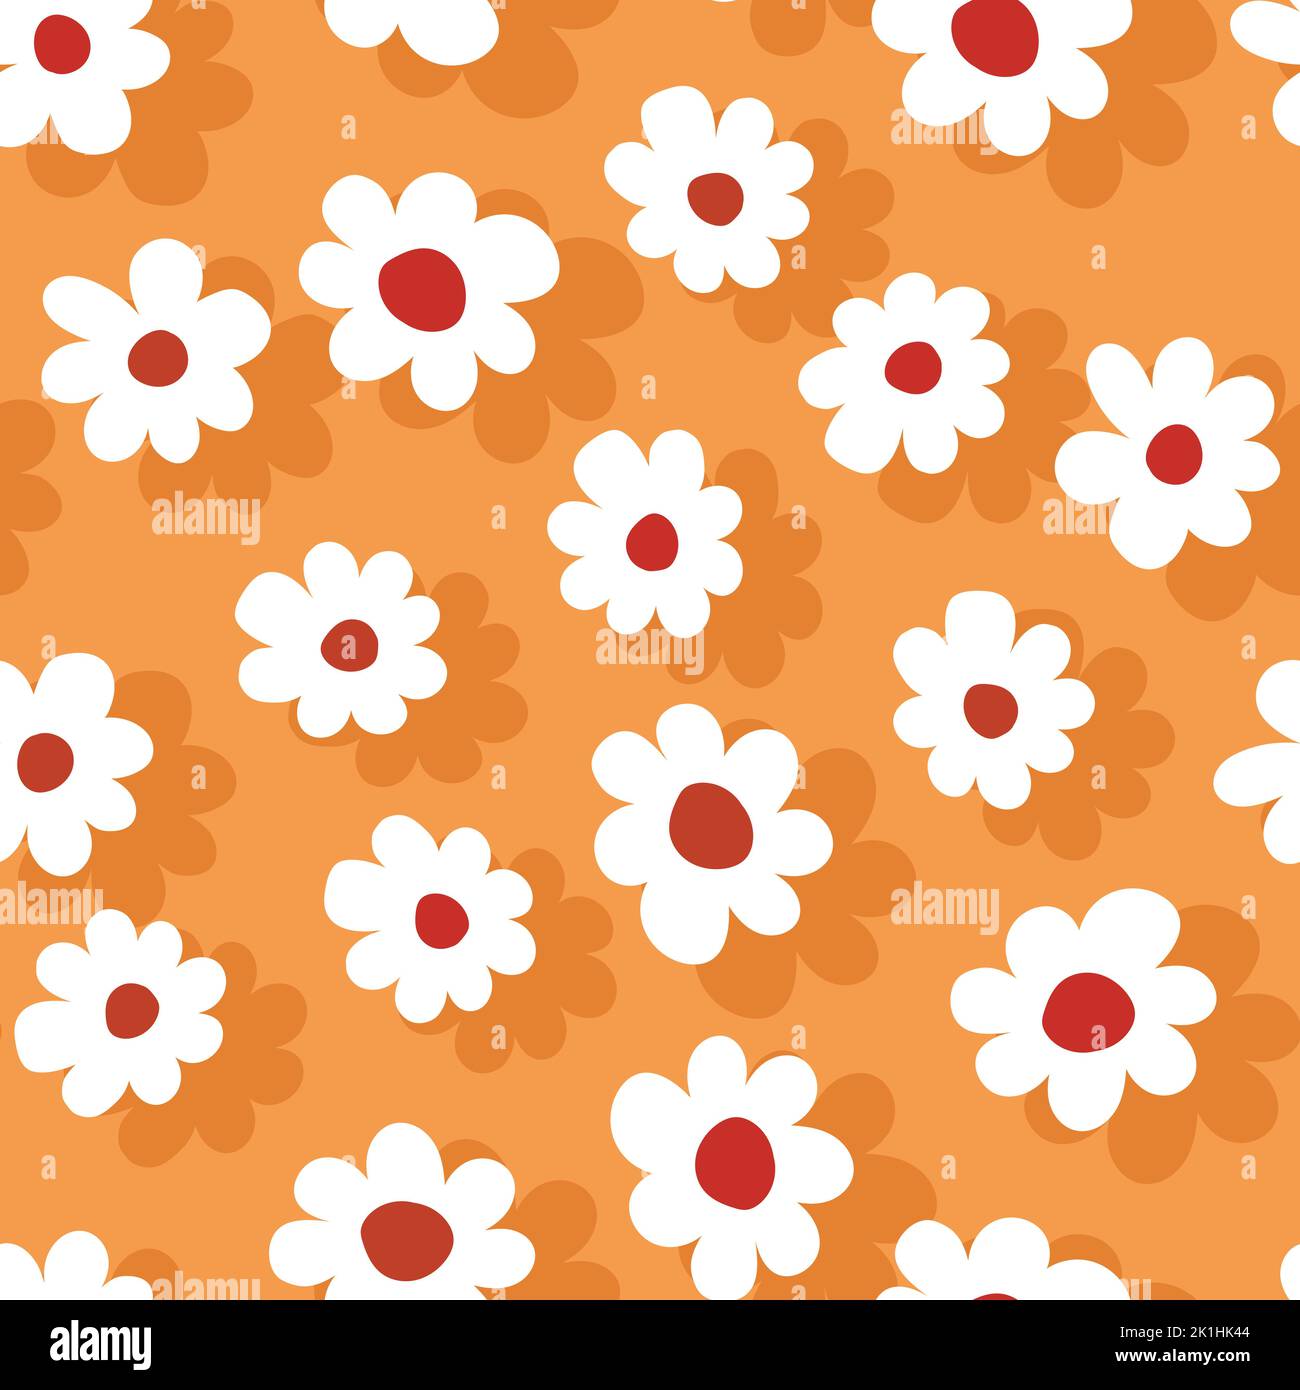 Bohemian floral seamless pattern with dark brown background,white and red  watercolor flowers Wrapping Paper by Elegant Home